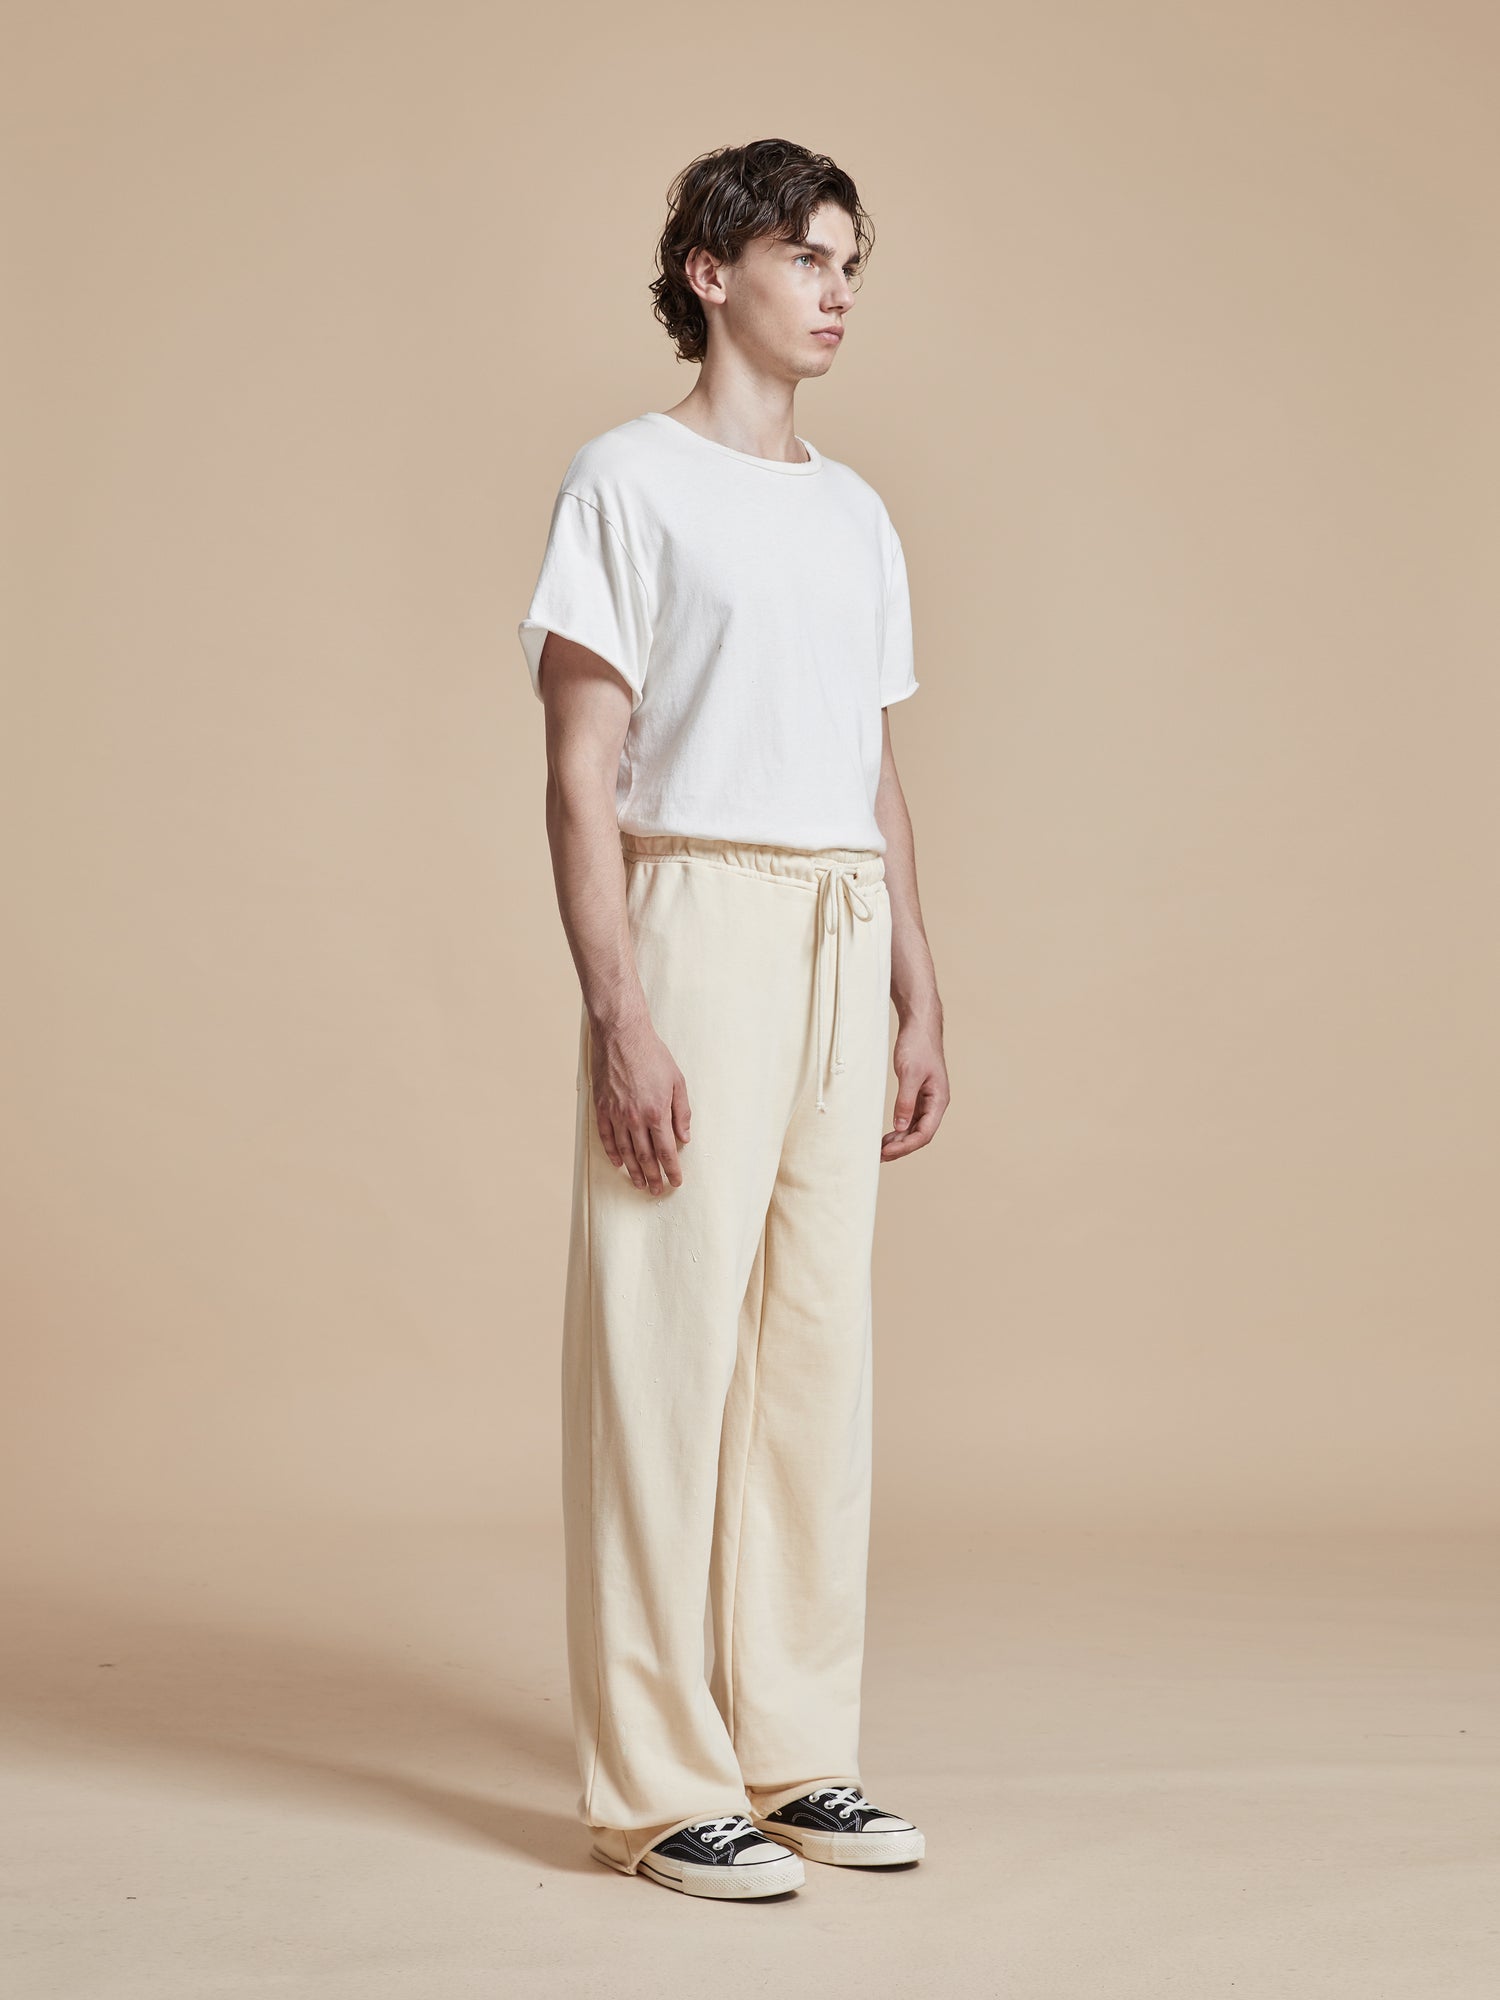 The model is wearing a white t-shirt and beige Found Sandshell Lounge Pants - both wardrobe staples.